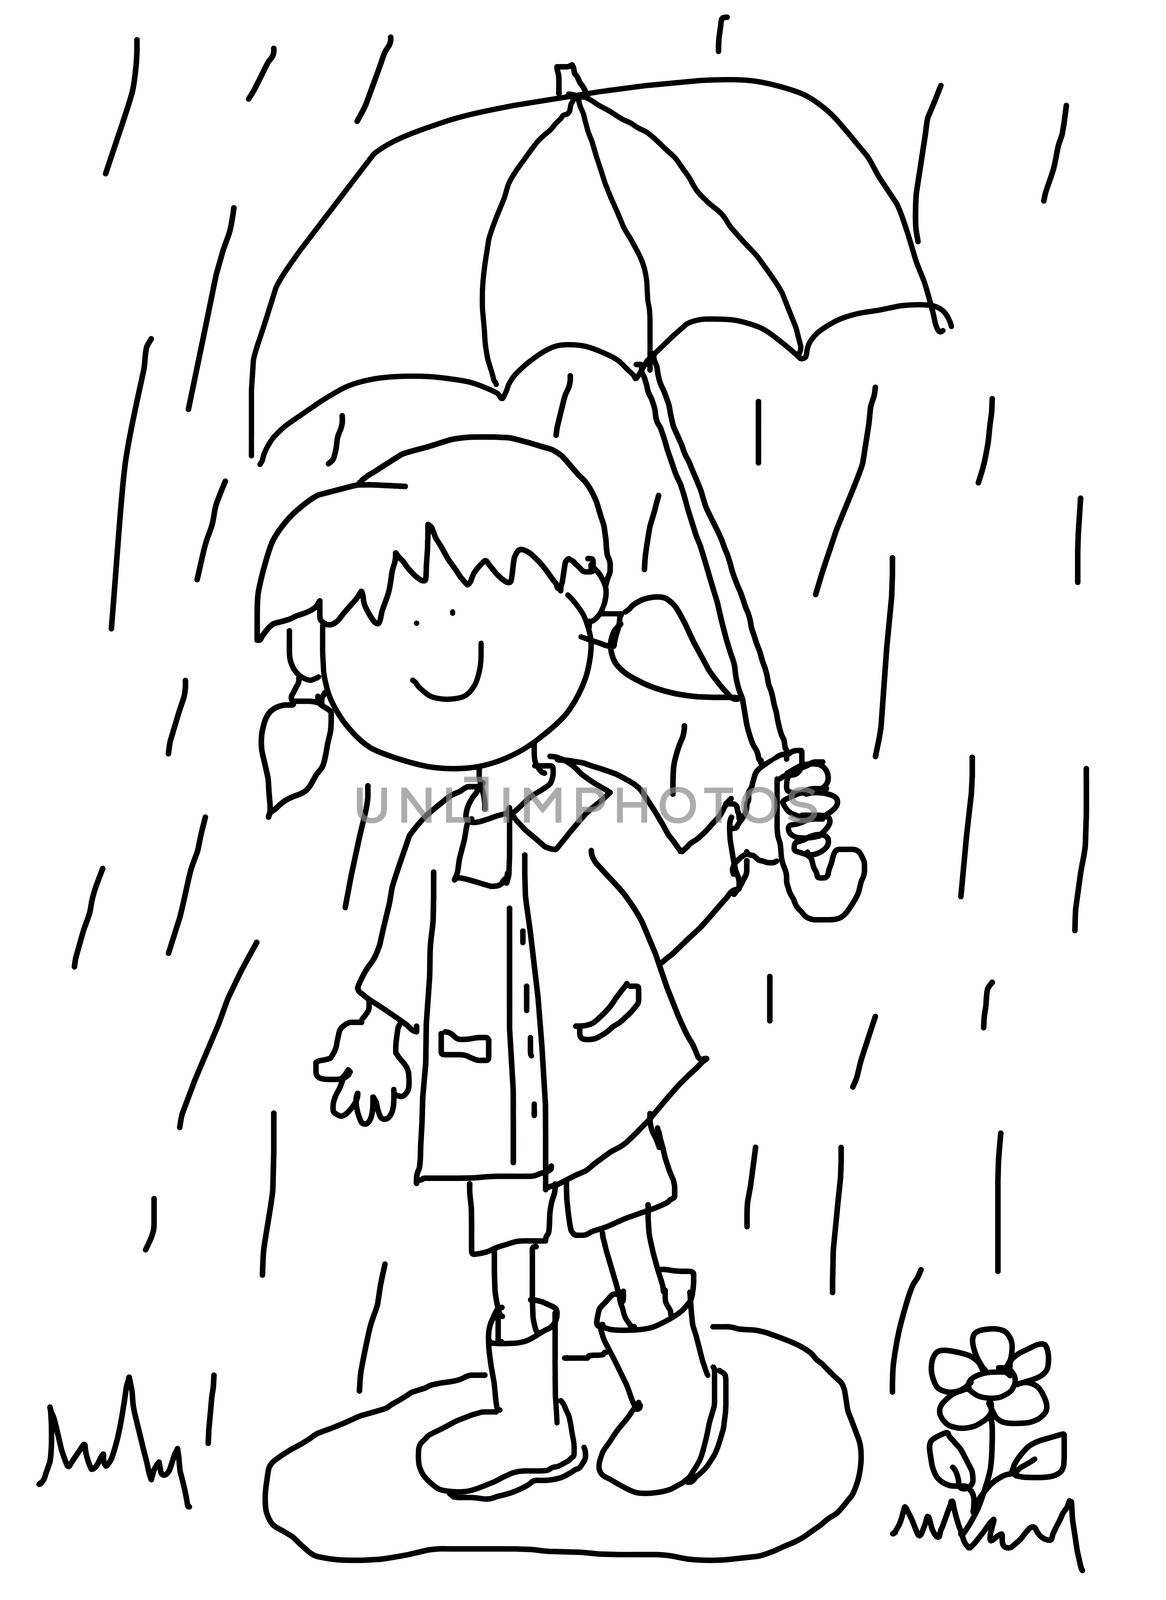 Little girl with umbrella cartoon by Mirage3